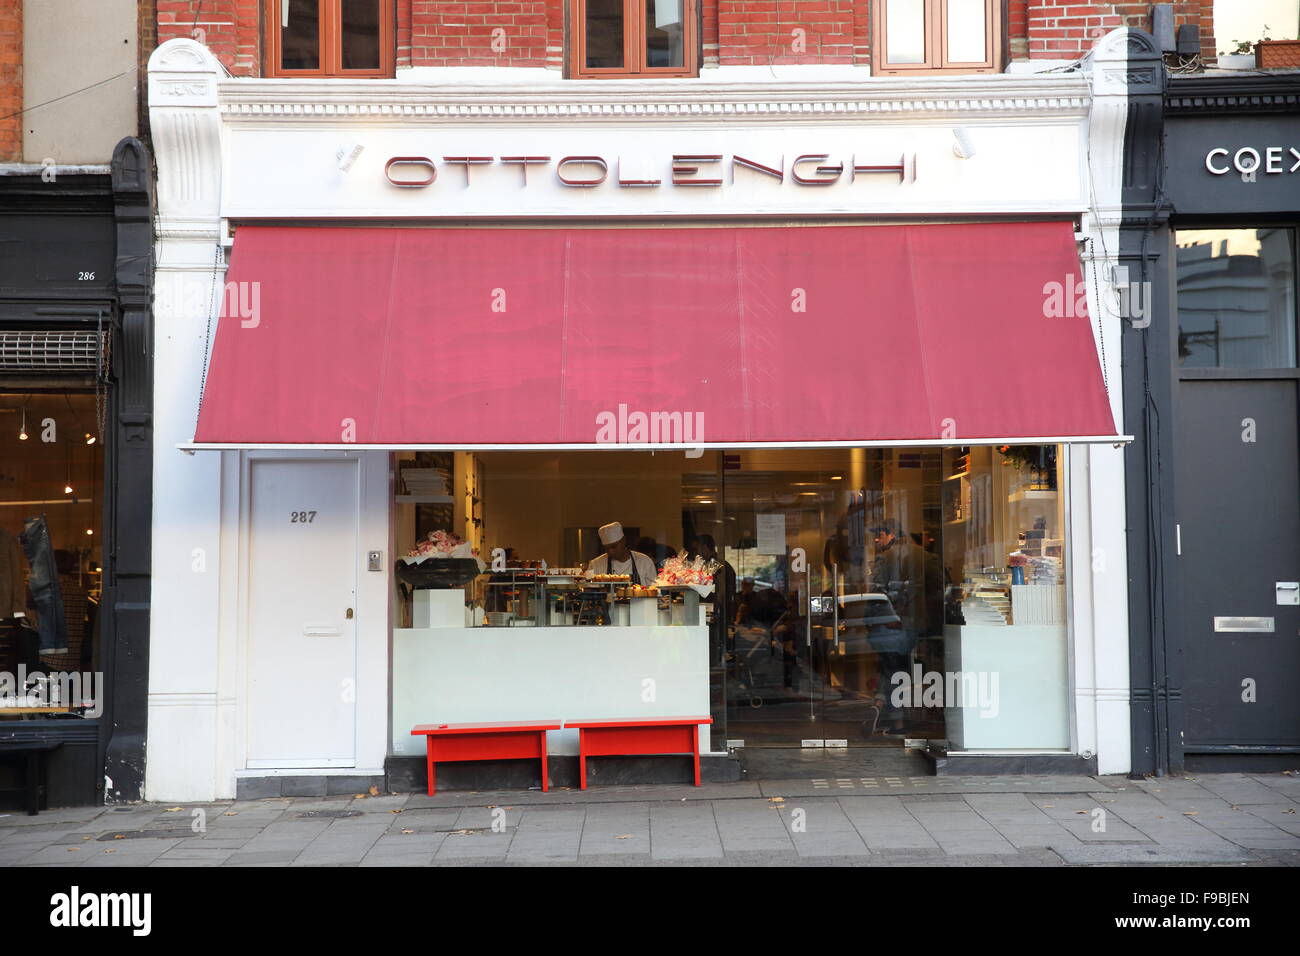 The famous and popular smart dining Yotam Ottolenghi restaurant, on Upper Street in Islington, North London, England, UK Stock Photo